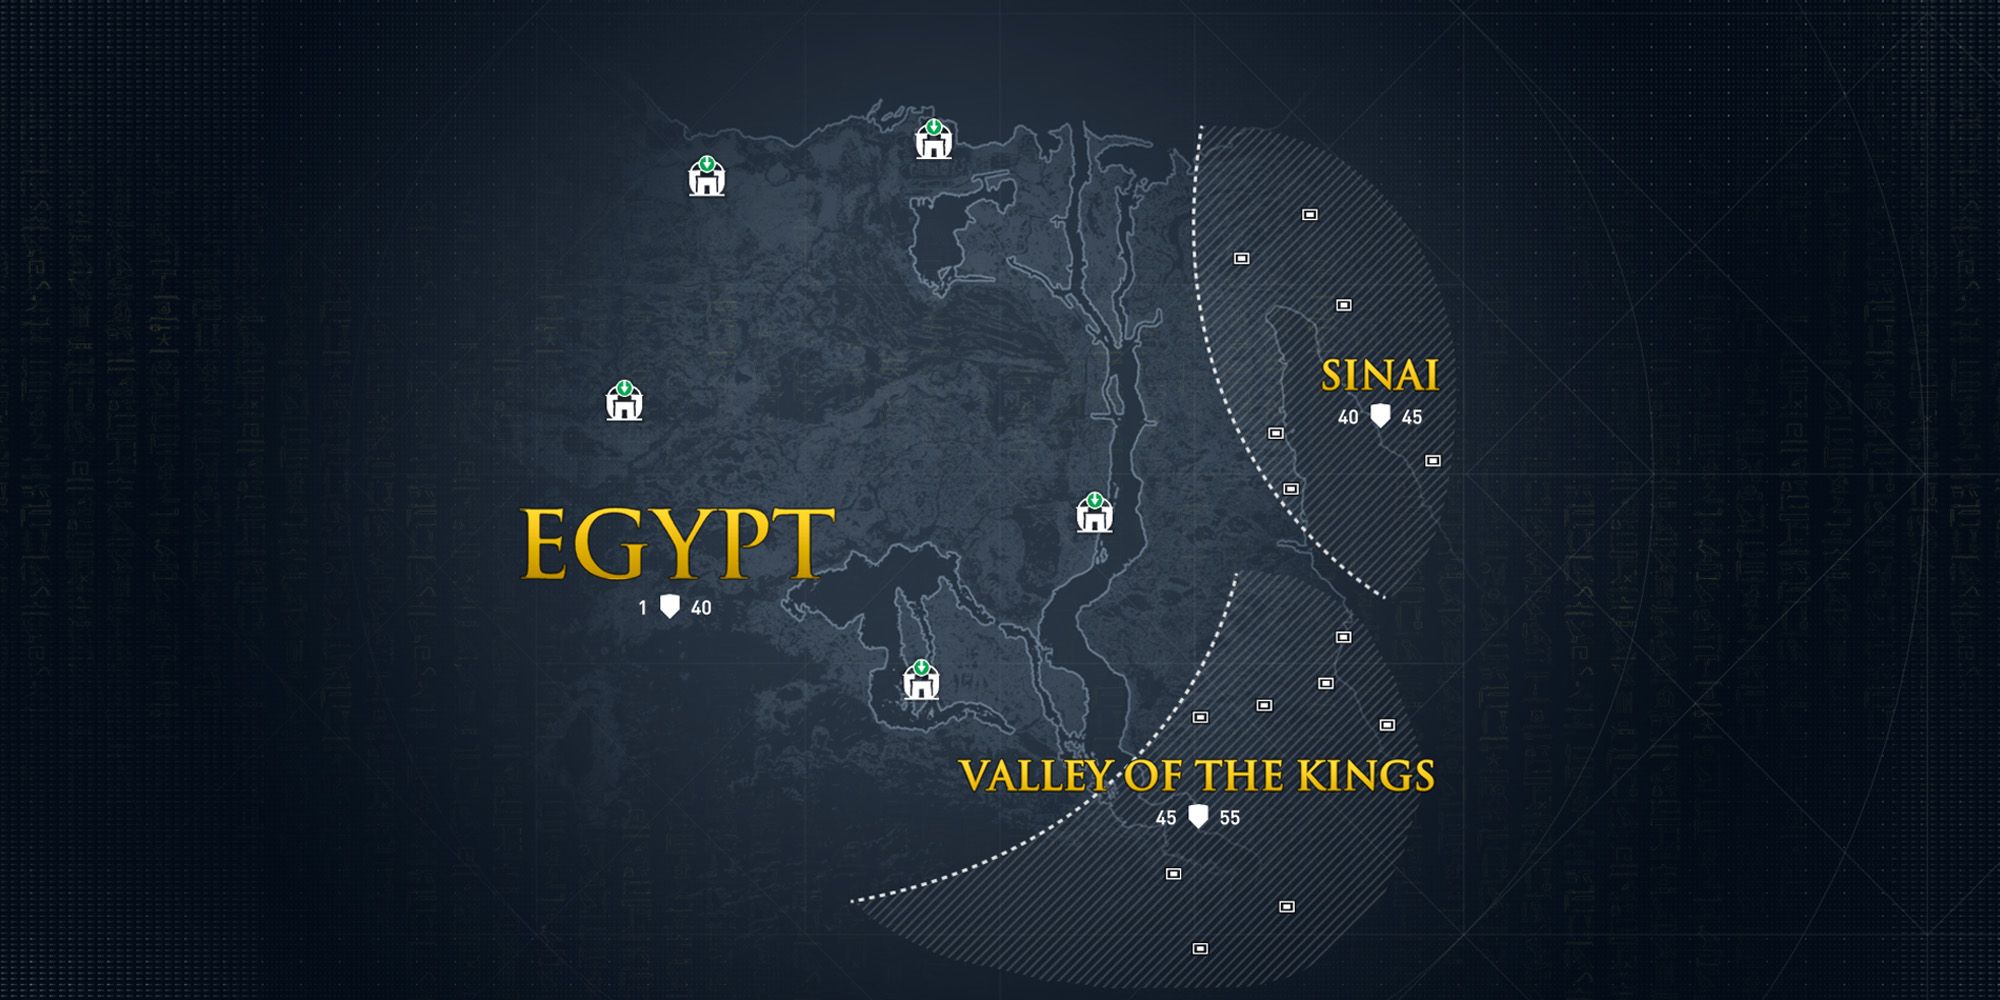 Opening the atlas on Assassin's Creed Origins' world map, which reveals the Sinai desert and the Valley of the Kings, the game's DLC locations.